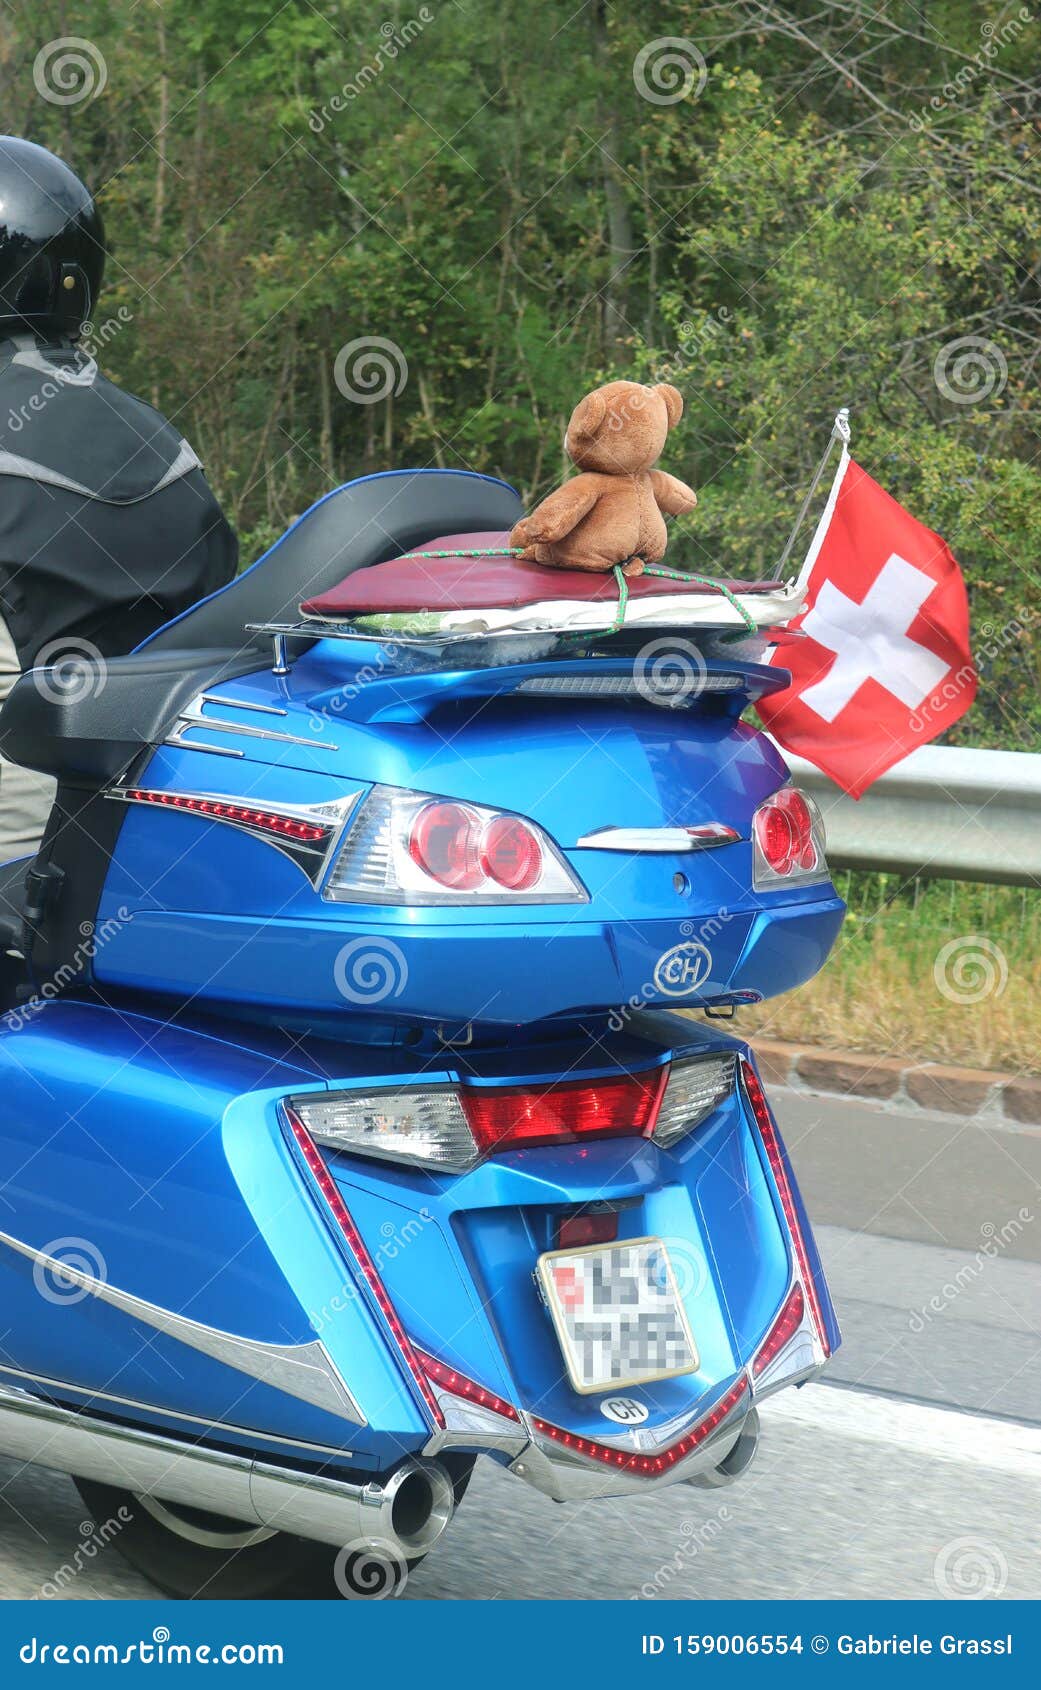 Biker with a Large Motorcycle Decorated with a Swiss Lag and a Teddy ...